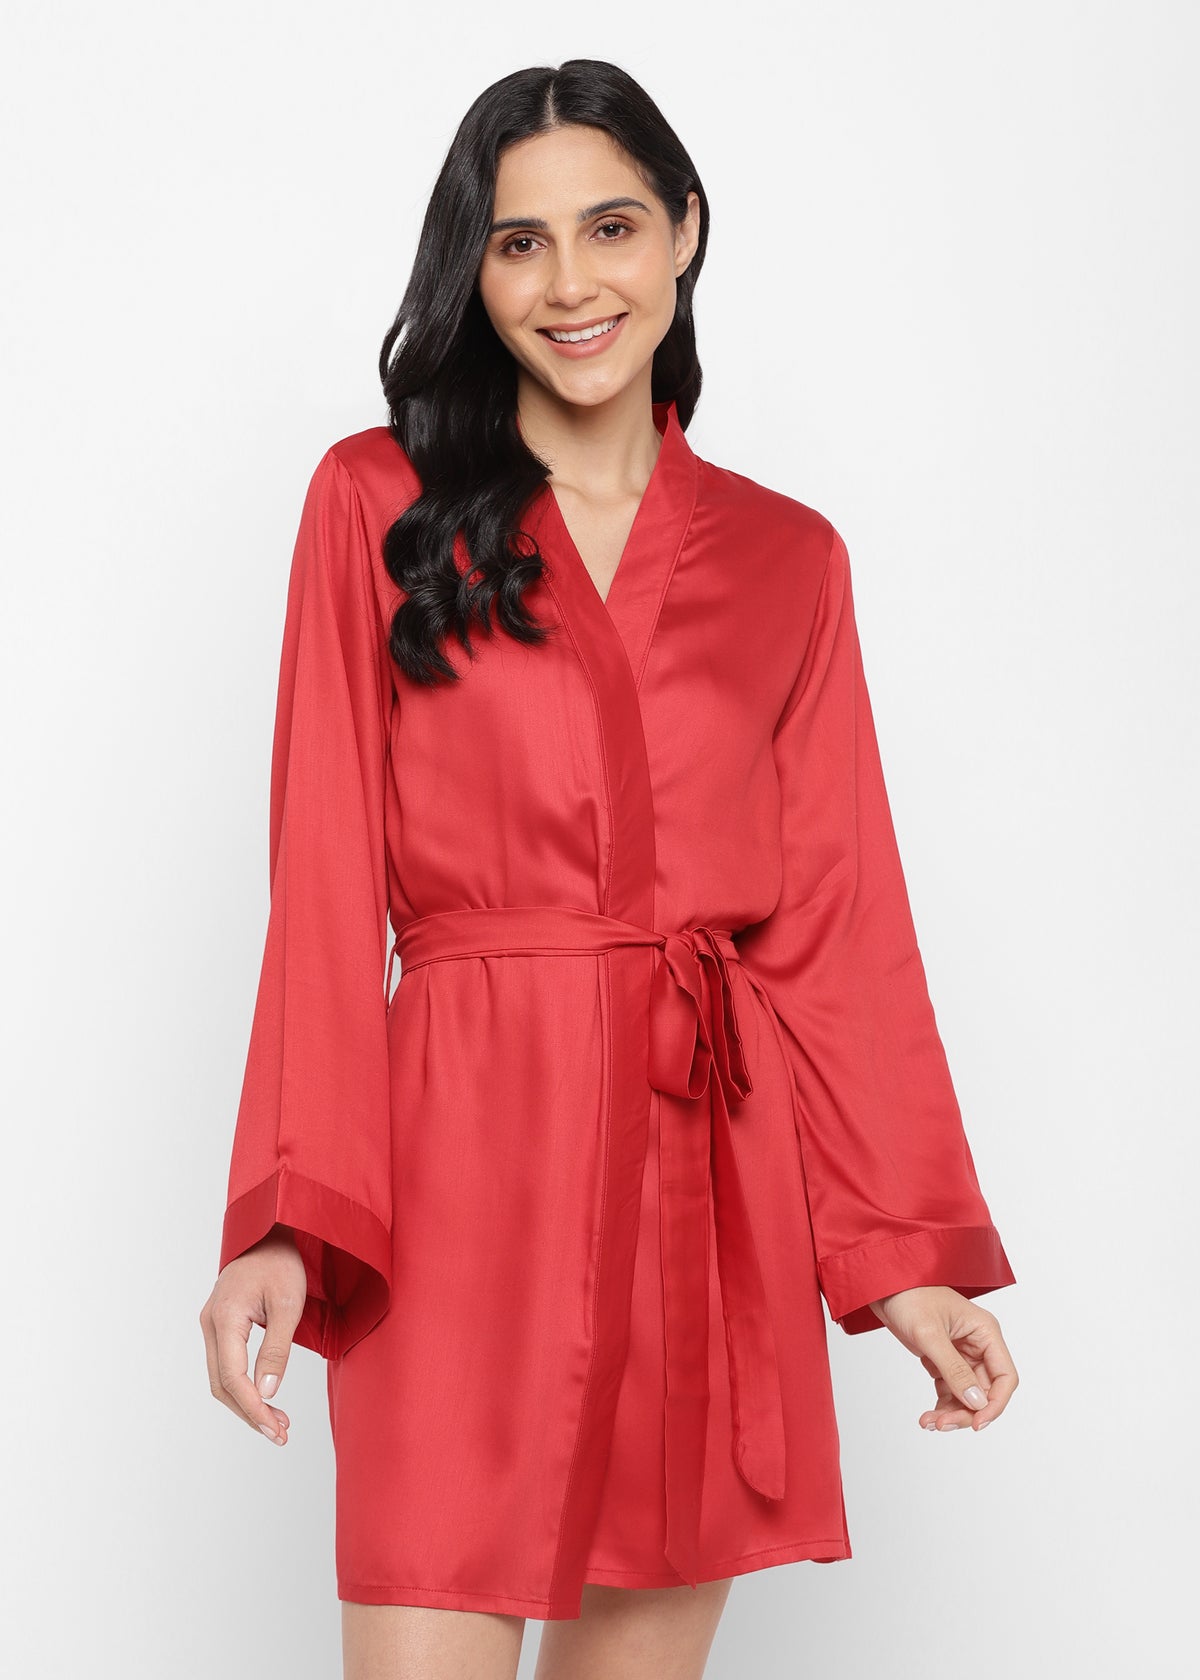 Red Modal Satin Robe with Tie